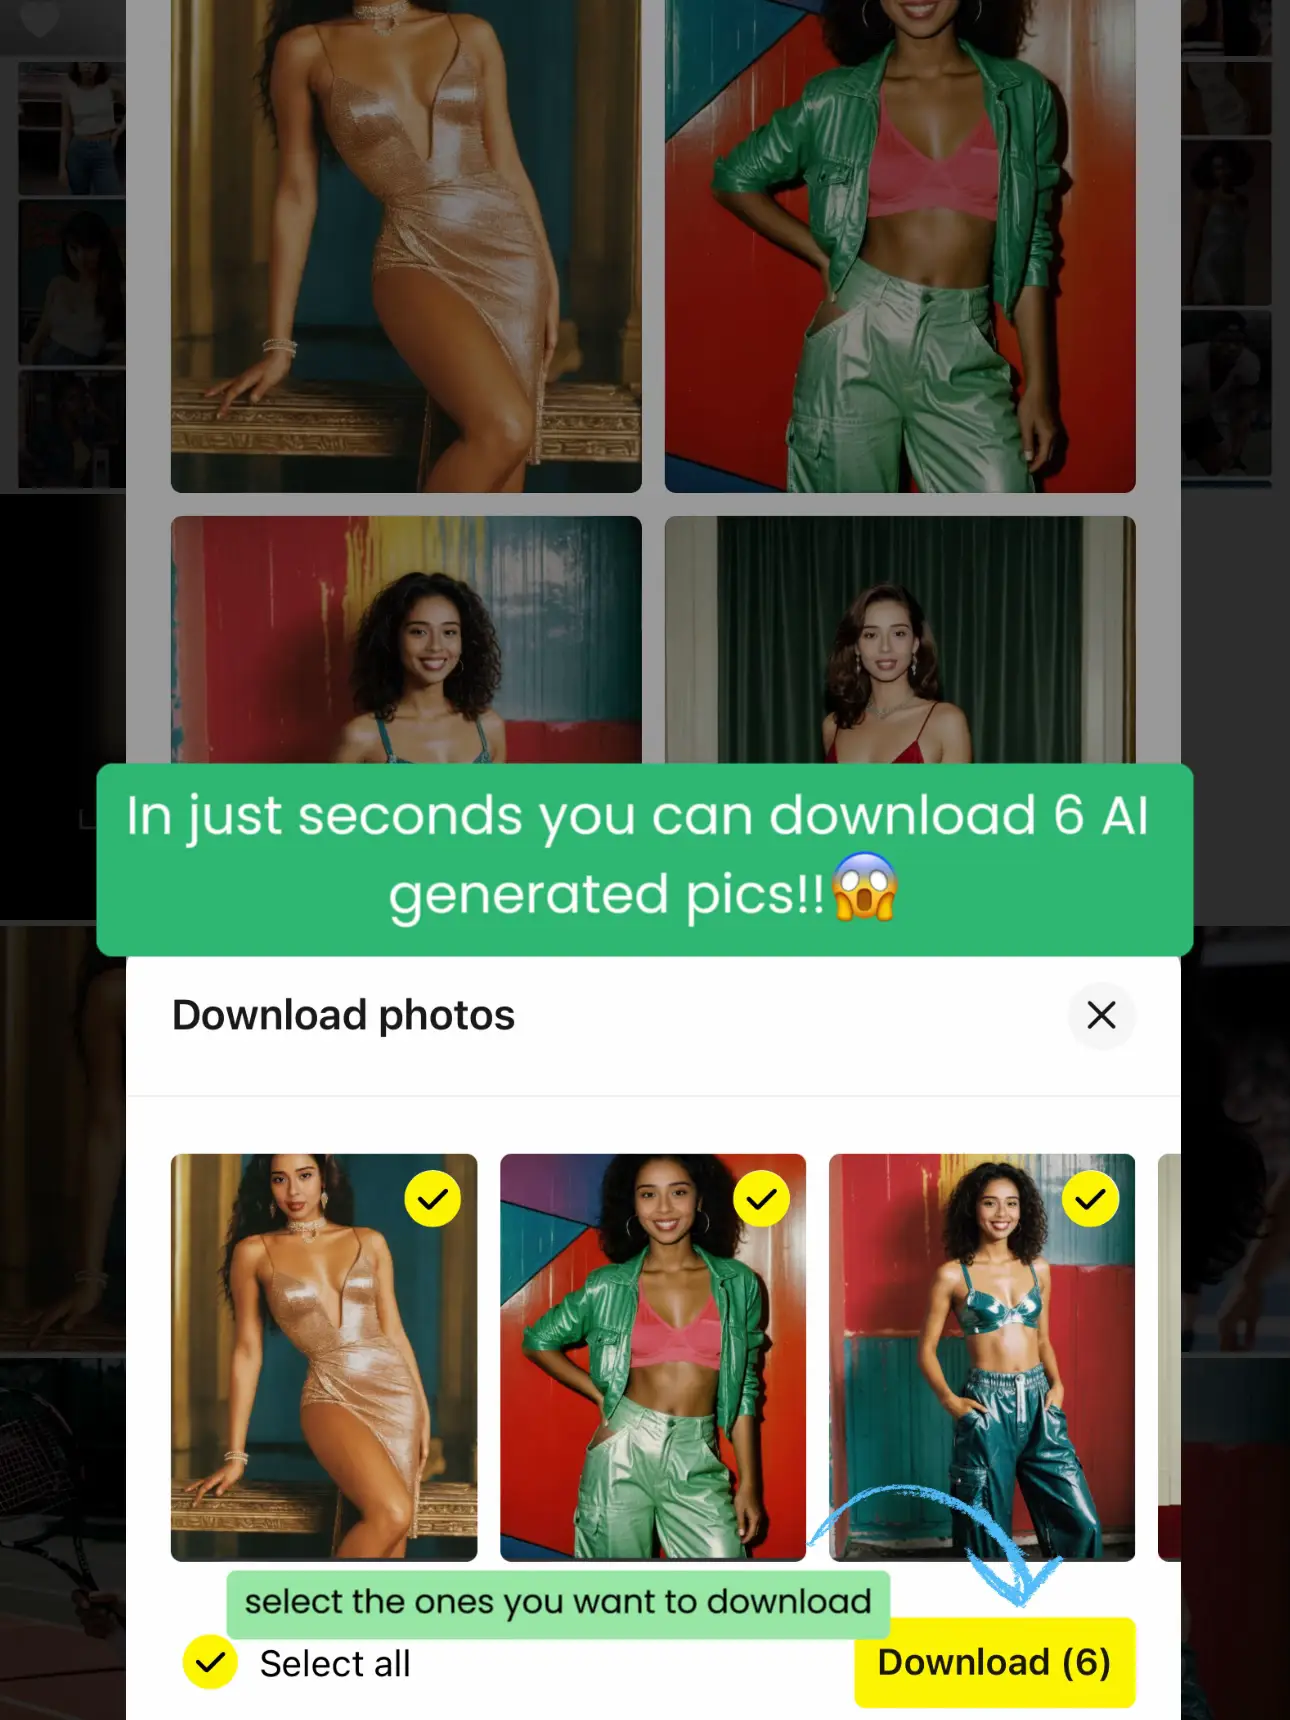  A list of photos are displayed with a green background.